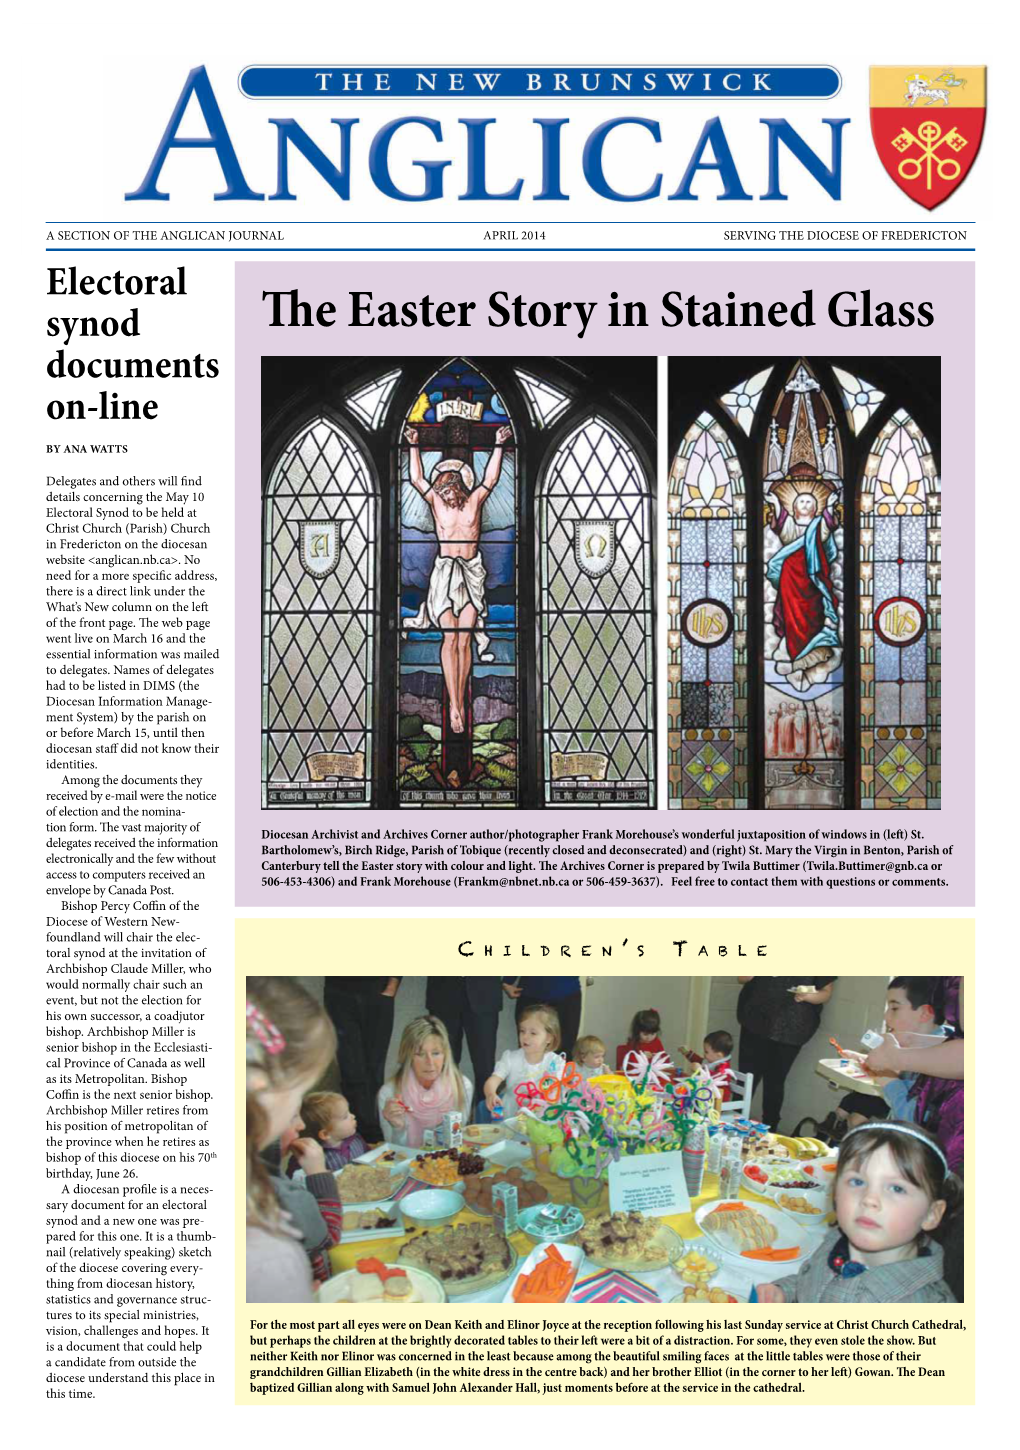 The Easter Story in Stained Glass Documents On-Line by Ana Watts